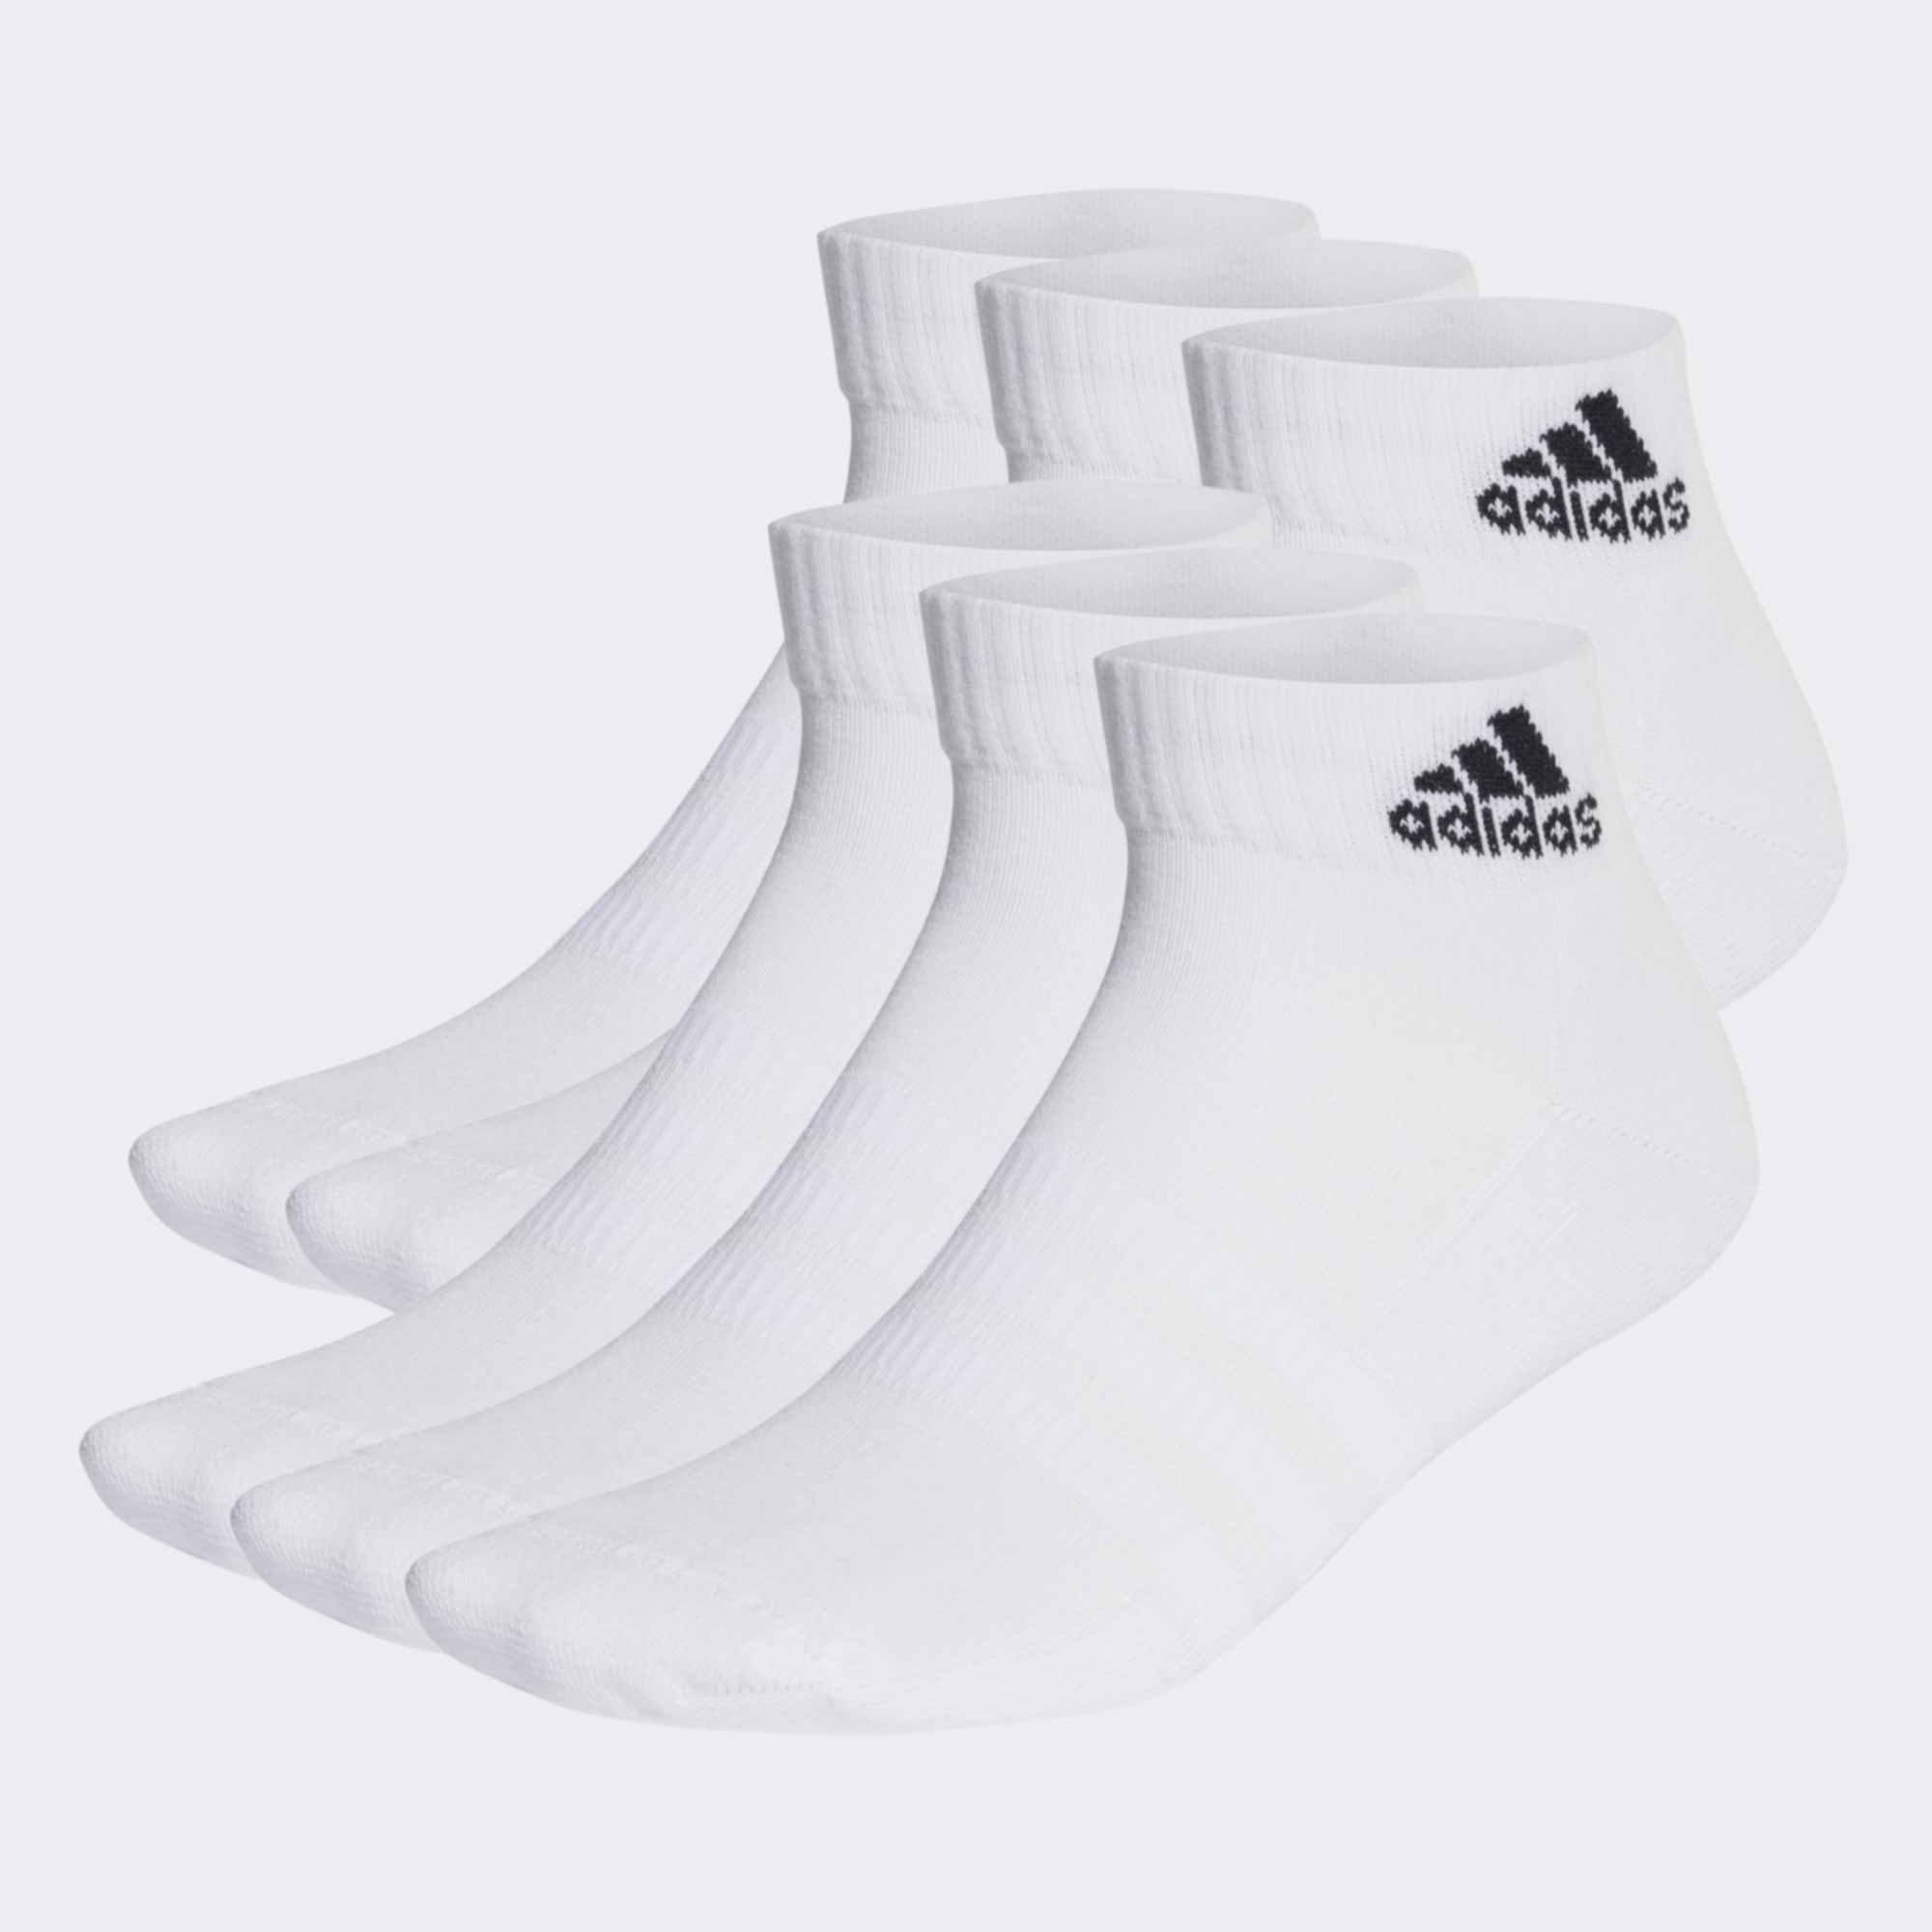 adidas Cushioned Ankle 6 Pack Socks